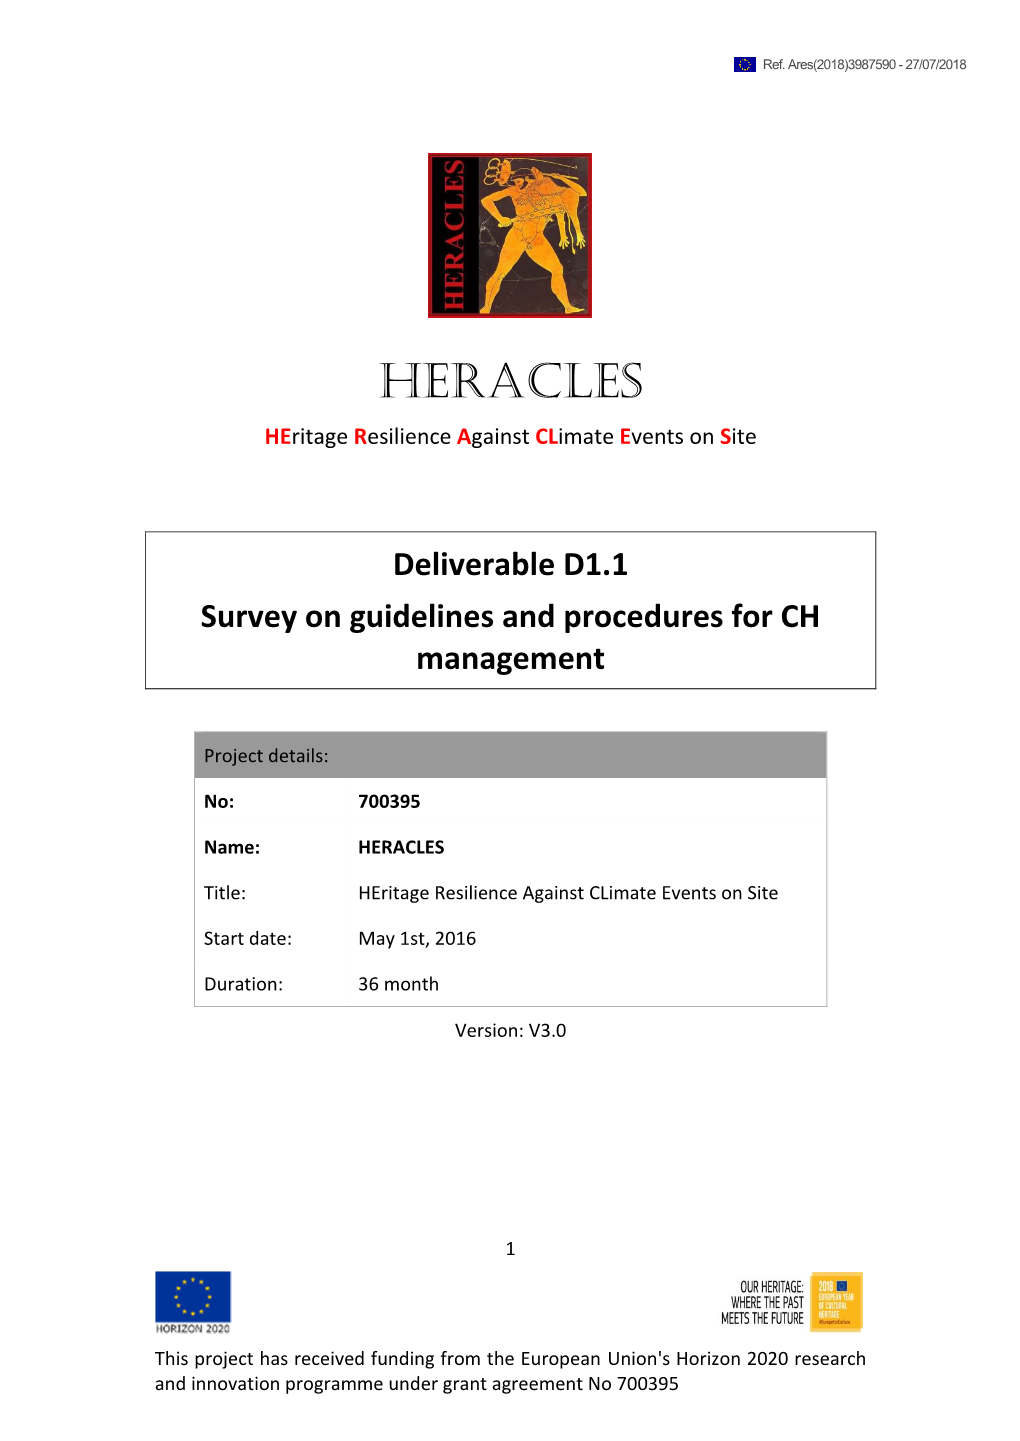 Survey on Guidelines and Procedures for CH Management